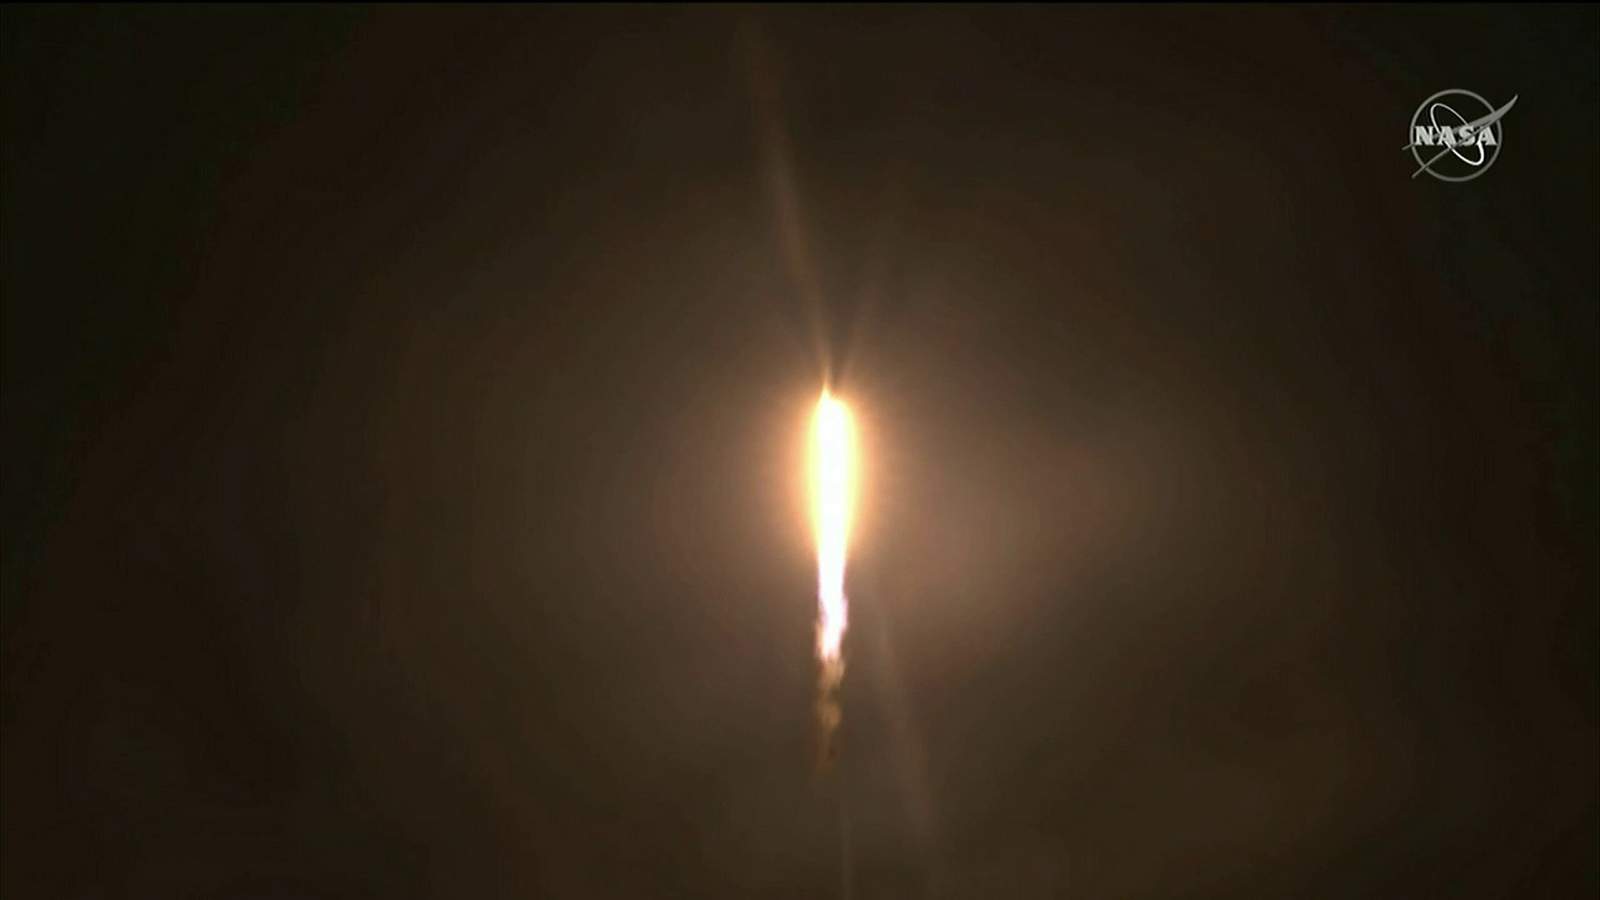 4 astronauts successfully launched into space from Cape Canaveral